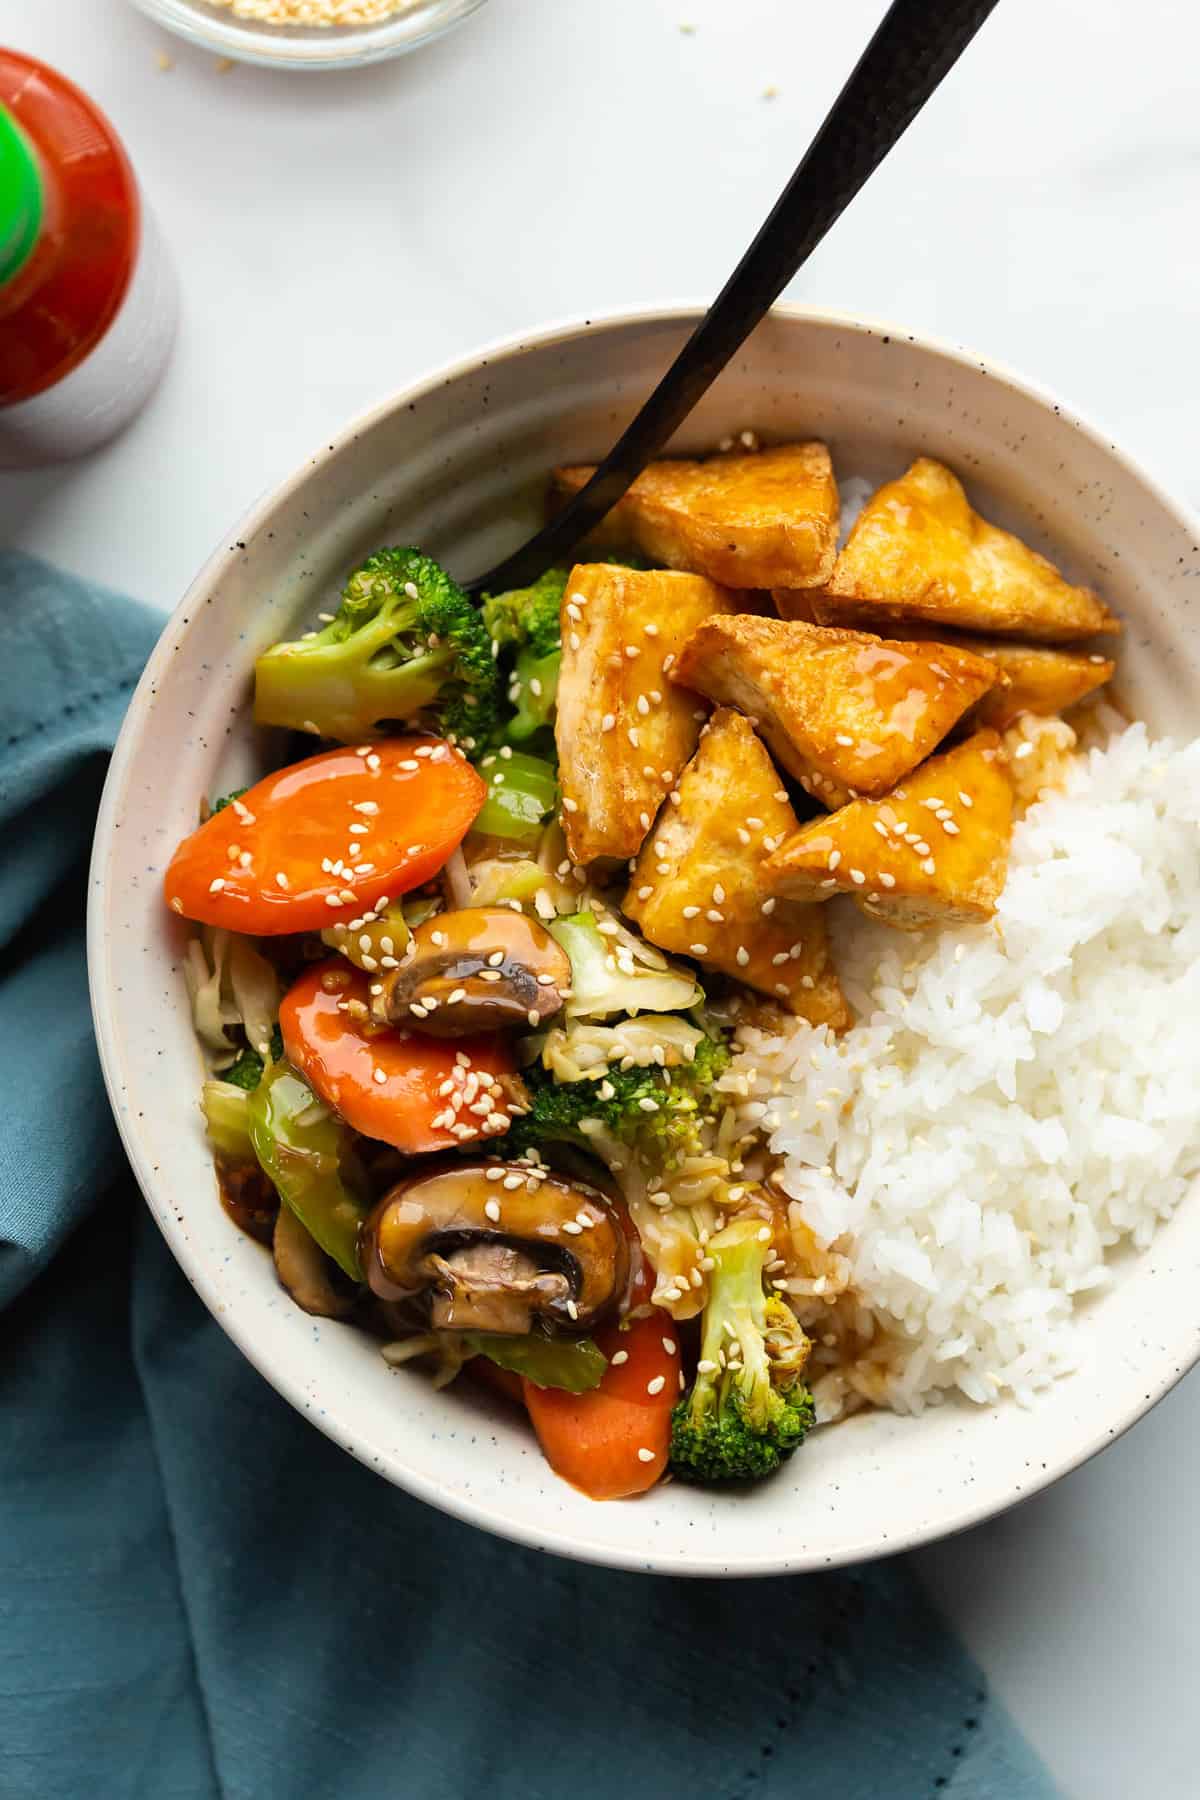 A bowl of steamed rice, tender-crisp vegetables and golden tofu topped with teriyaki sauce and toasted sesame seeds.